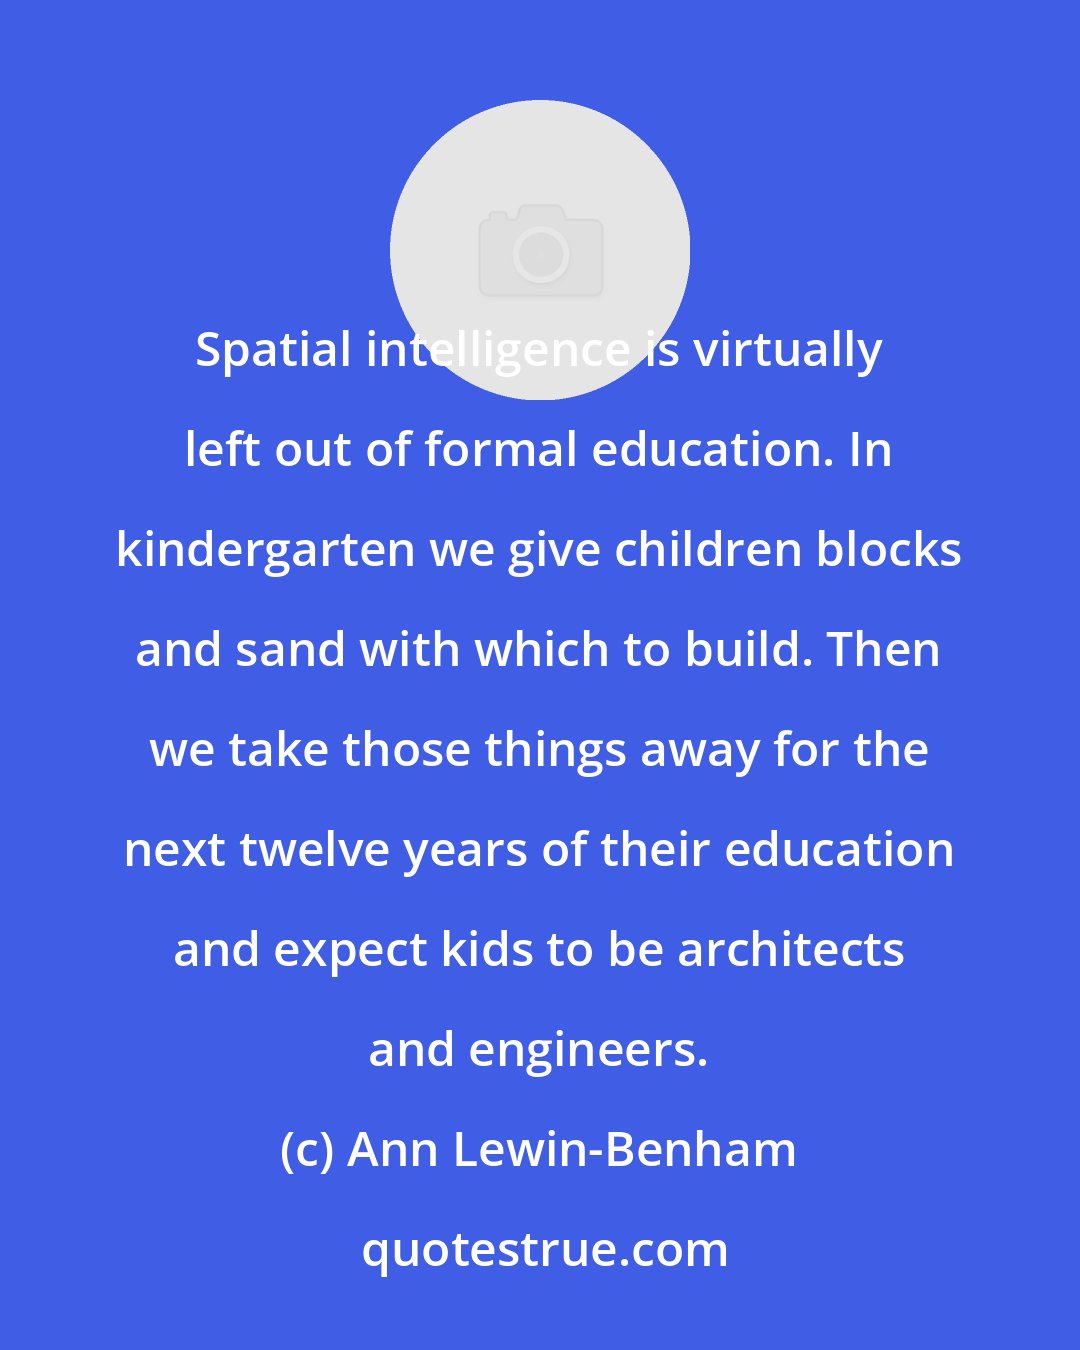 Ann Lewin-Benham: Spatial intelligence is virtually left out of formal education. In kindergarten we give children blocks and sand with which to build. Then we take those things away for the next twelve years of their education and expect kids to be architects and engineers.